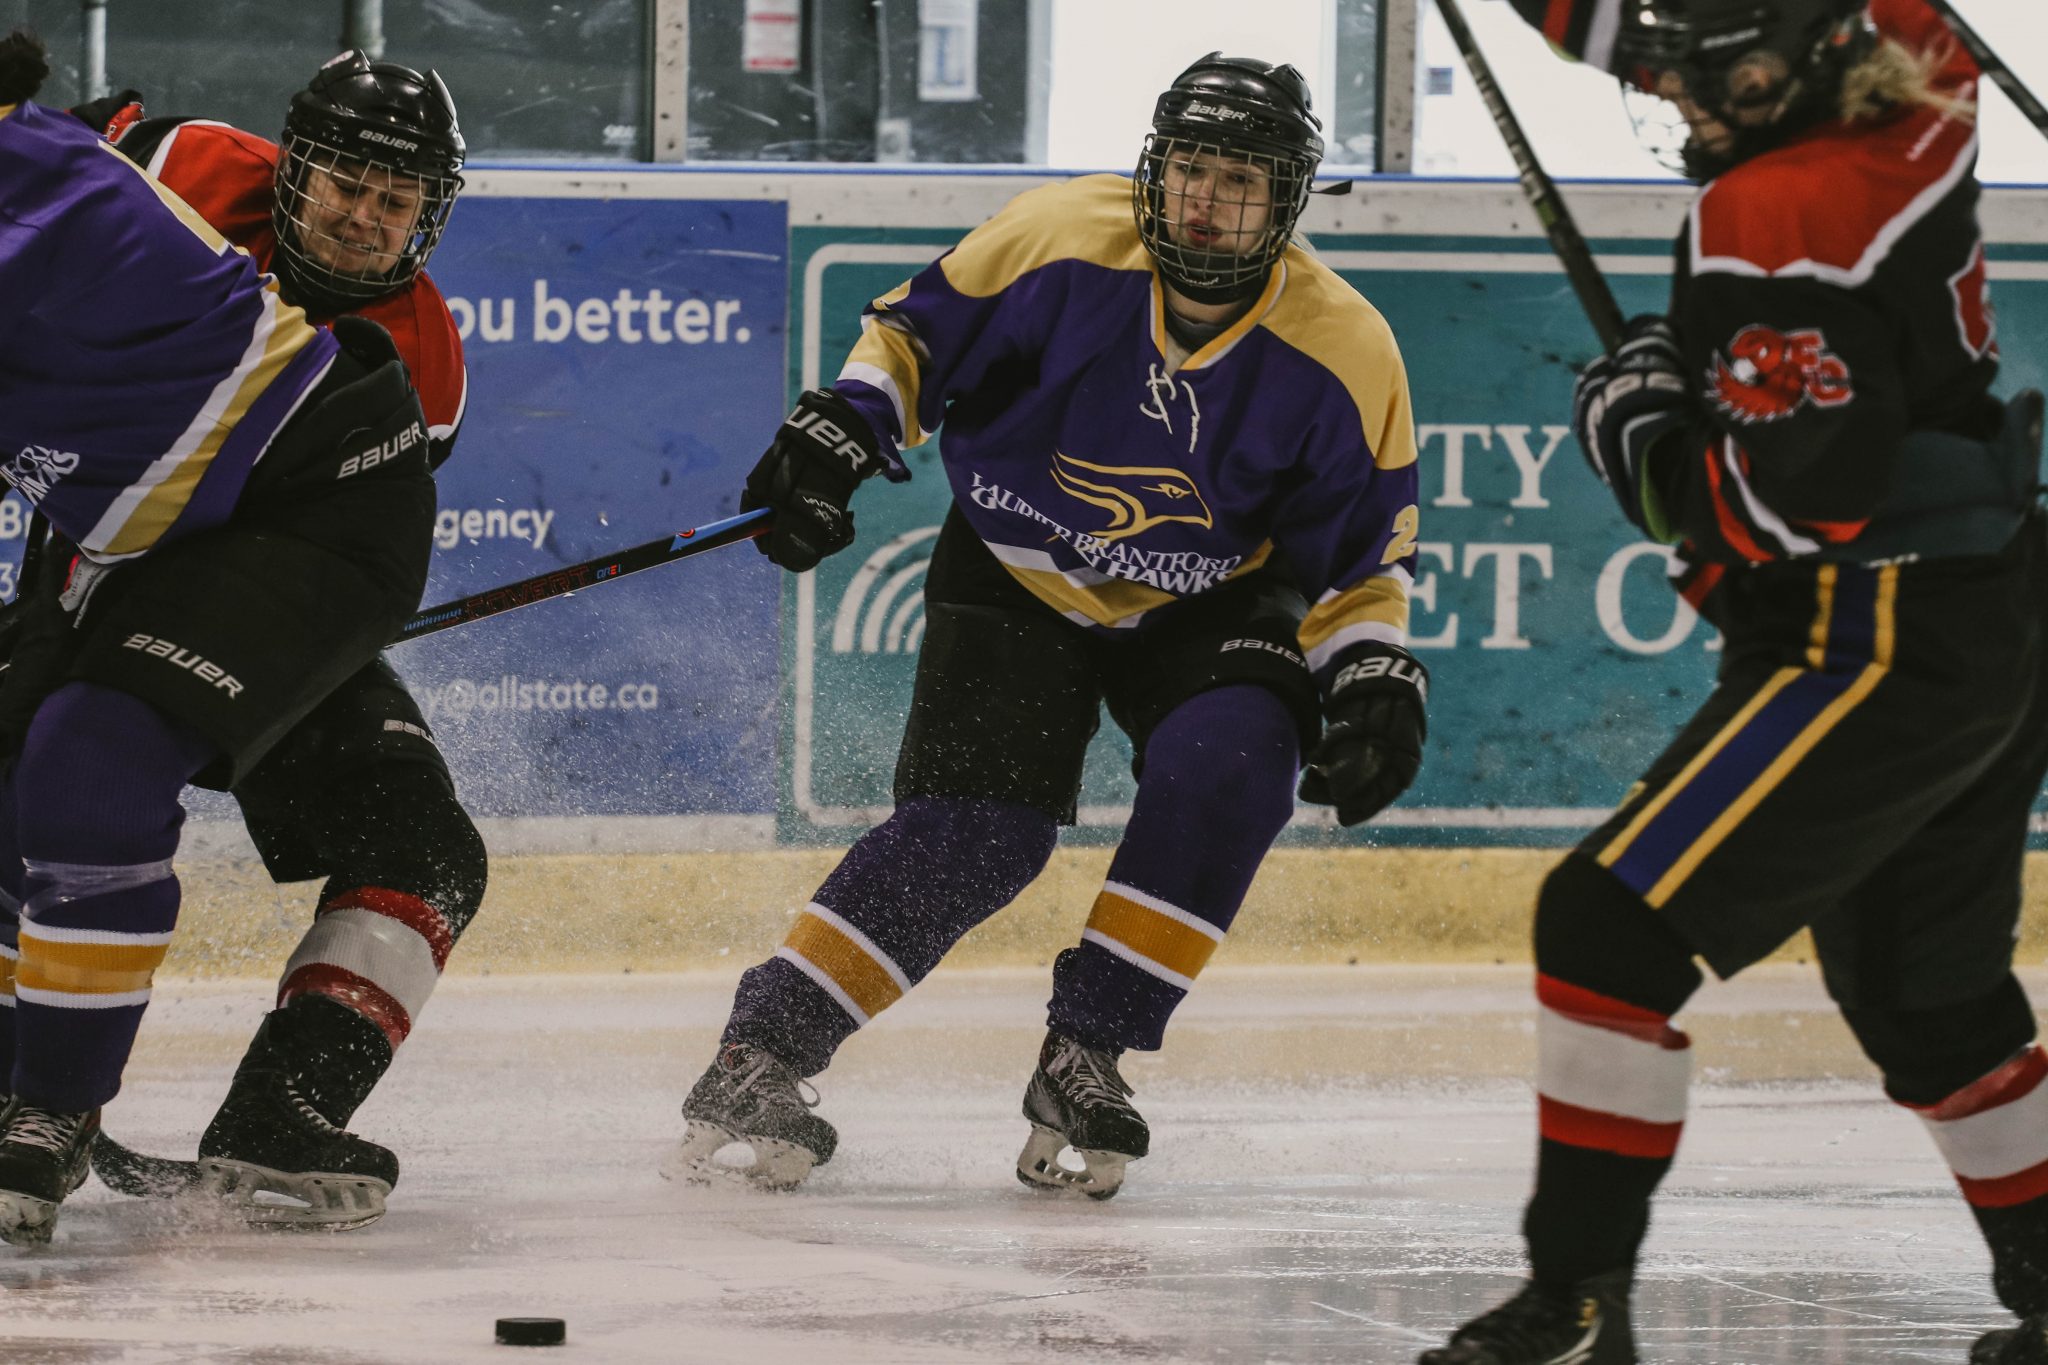 Laurier Brantford women's hockey player has her eyes on the puck between her opponents.